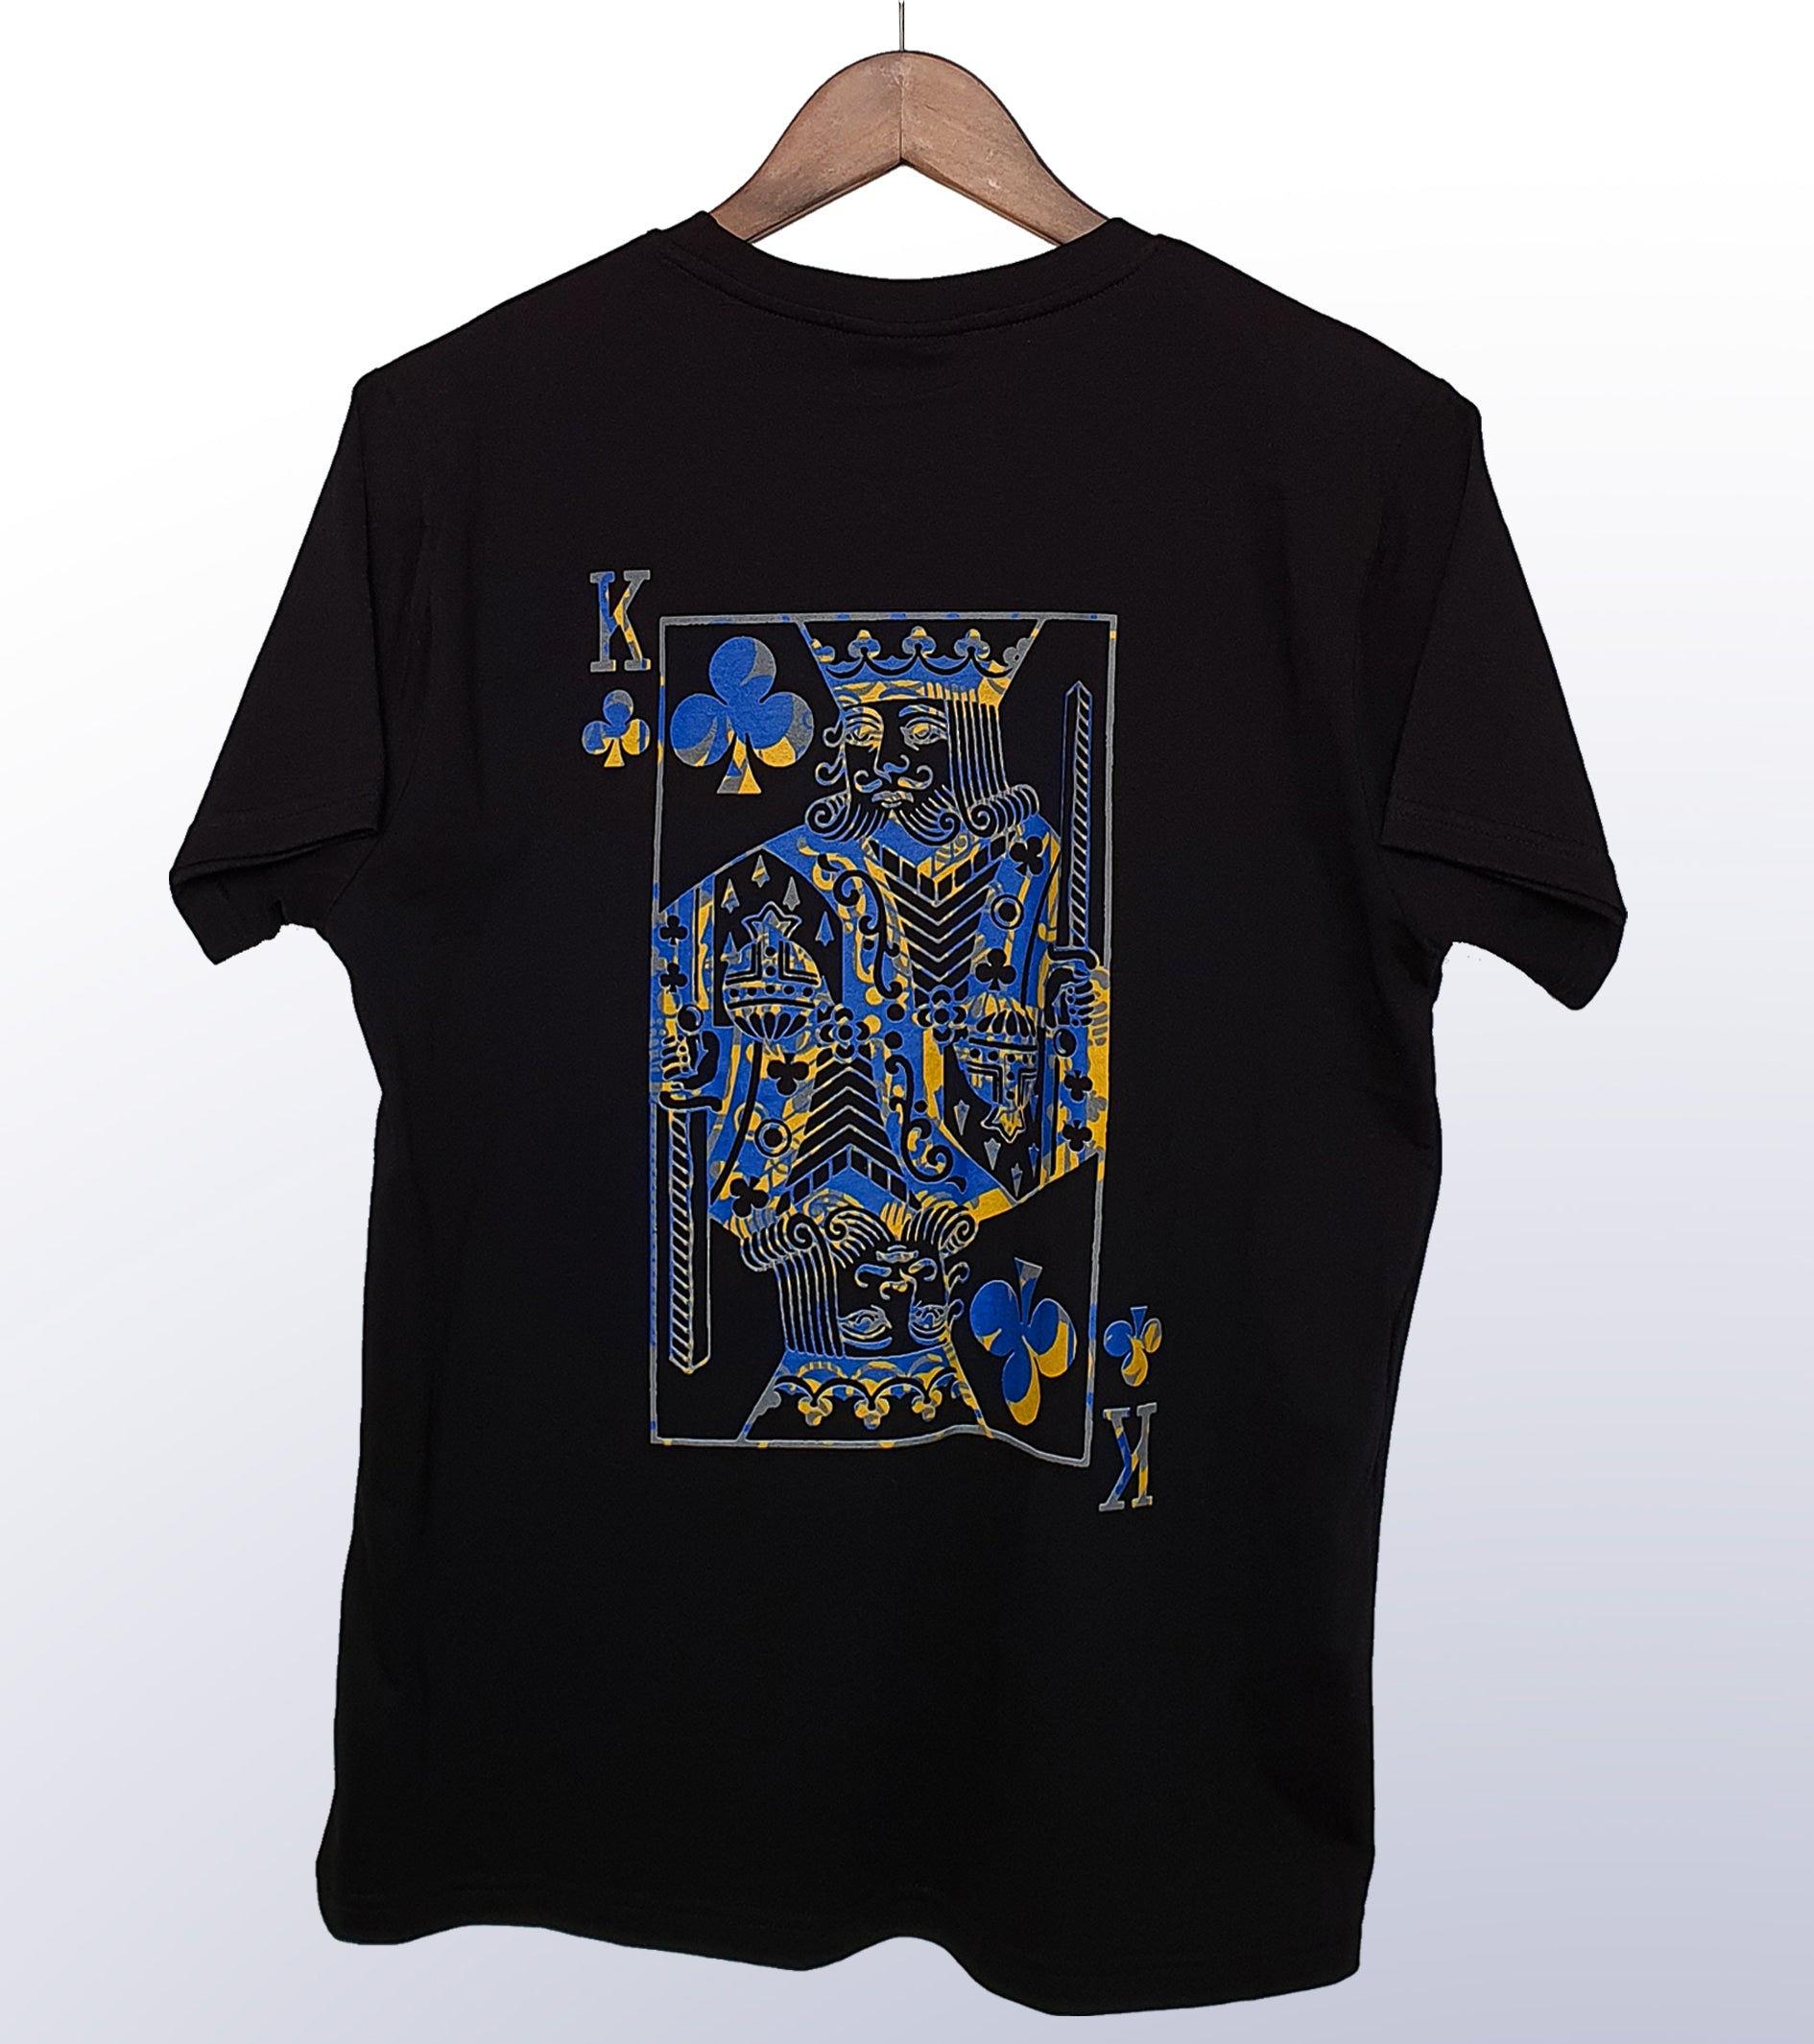 king of clubs, back print design, black tshirt, product, close-up